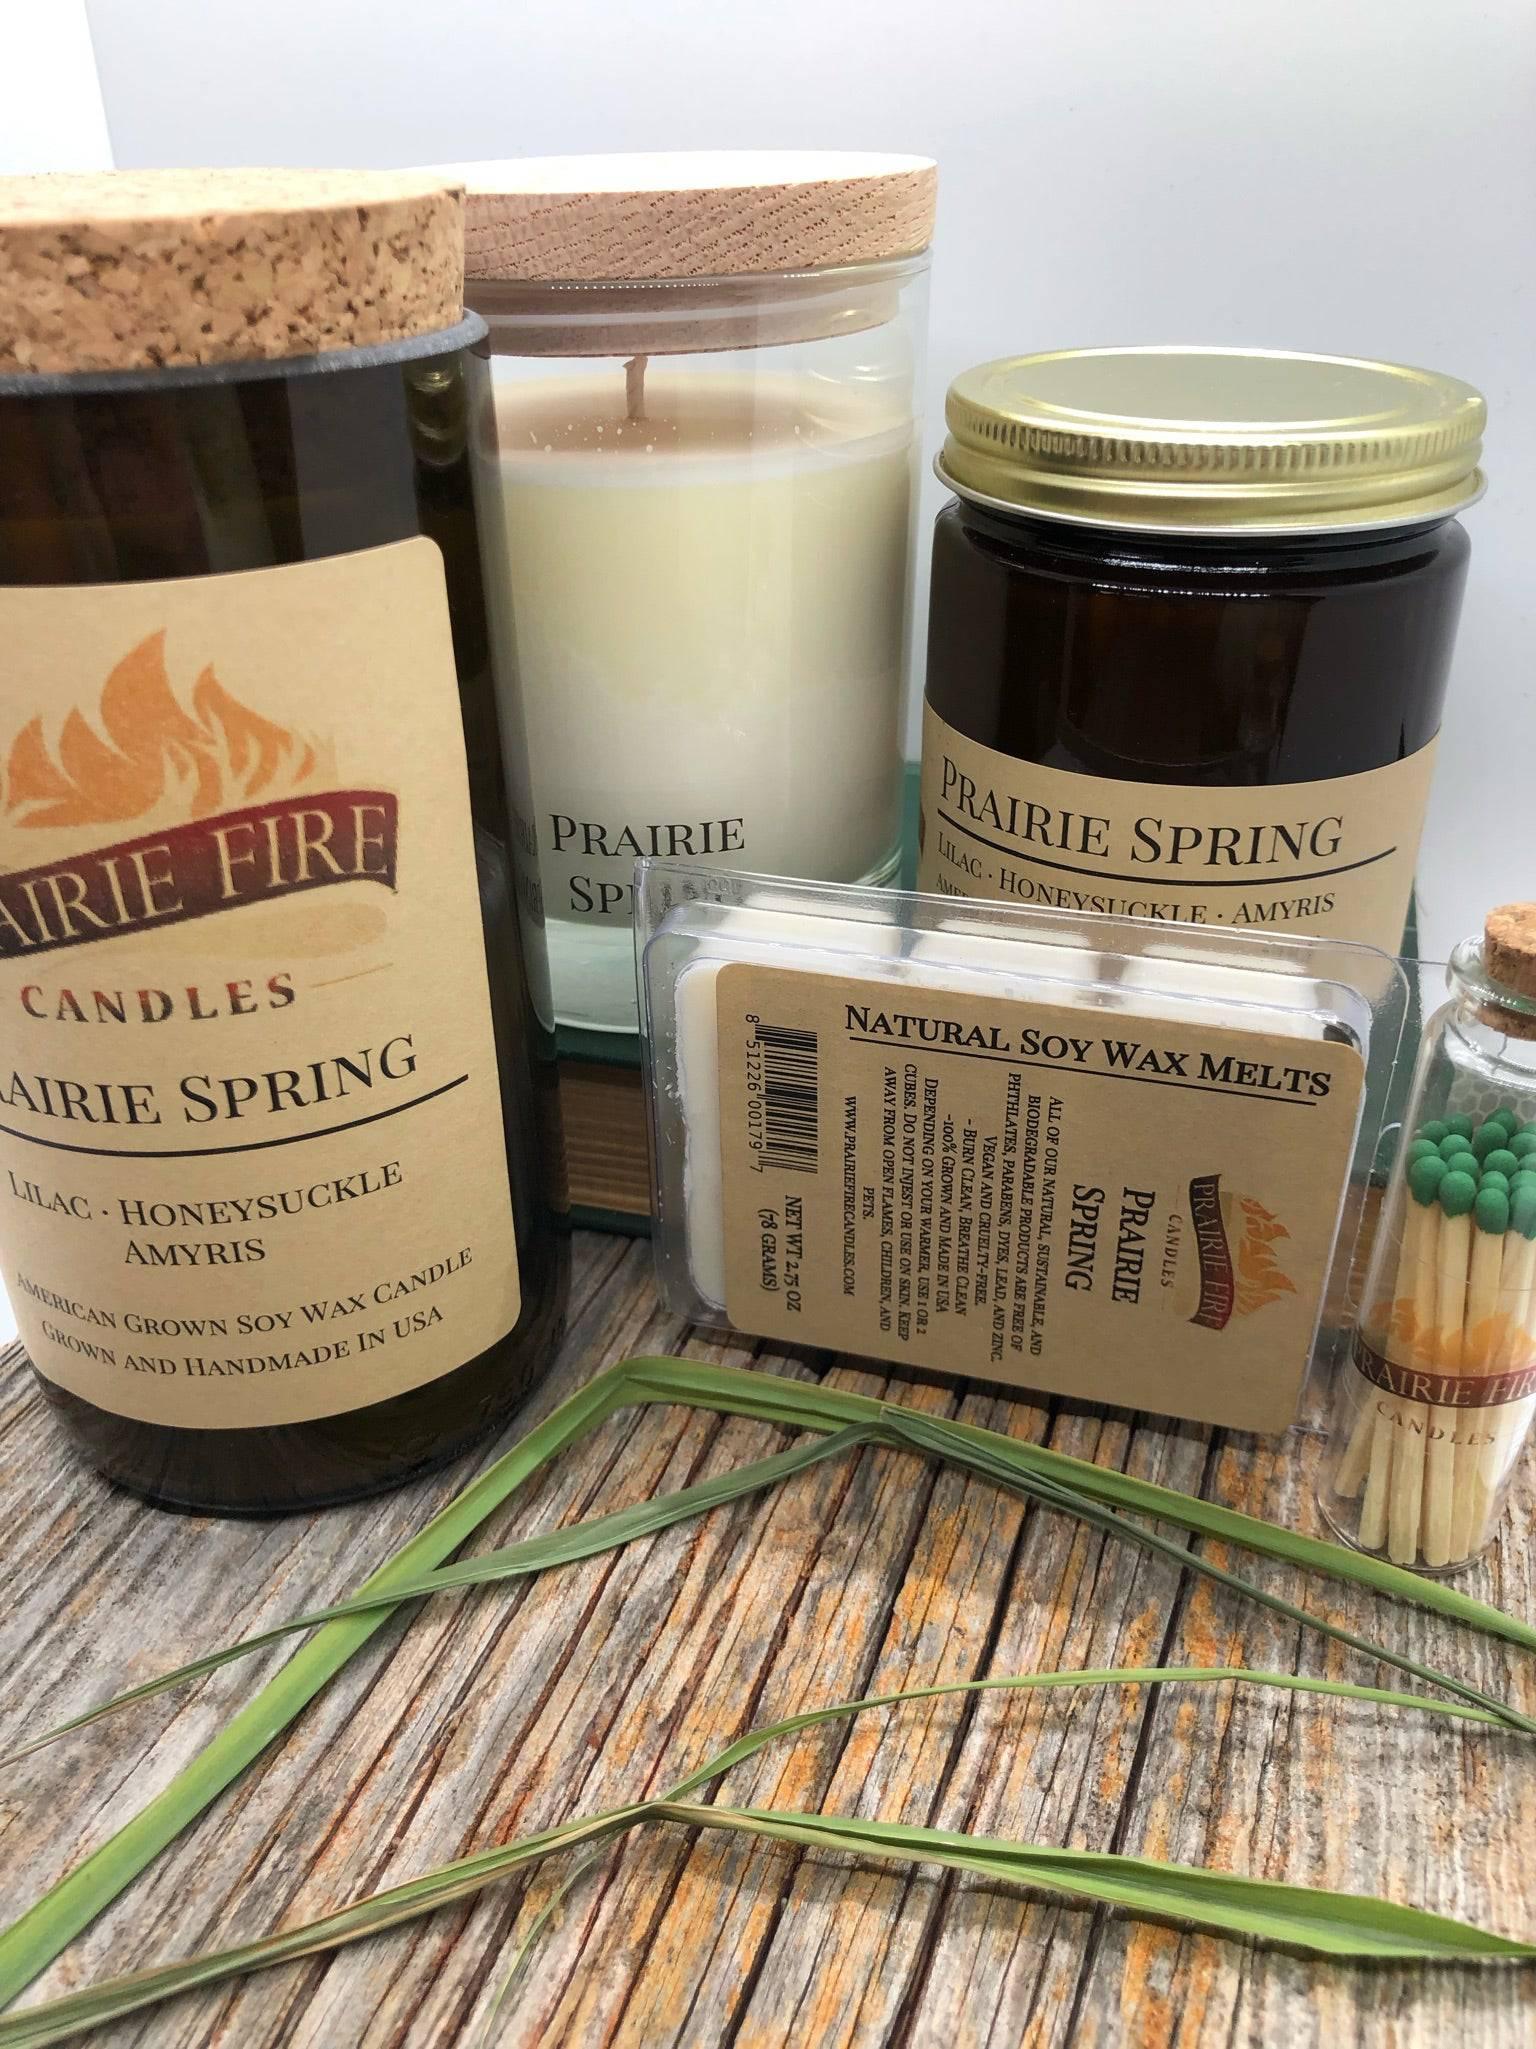 Prairie Spring Soy Wax Candle | Repurposed Wine Bottle Candle Natural Cork | Handmade in USA Candle | Eco-Friendly Candle | Non-Toxic Soy Candle - Prairie Fire Candles